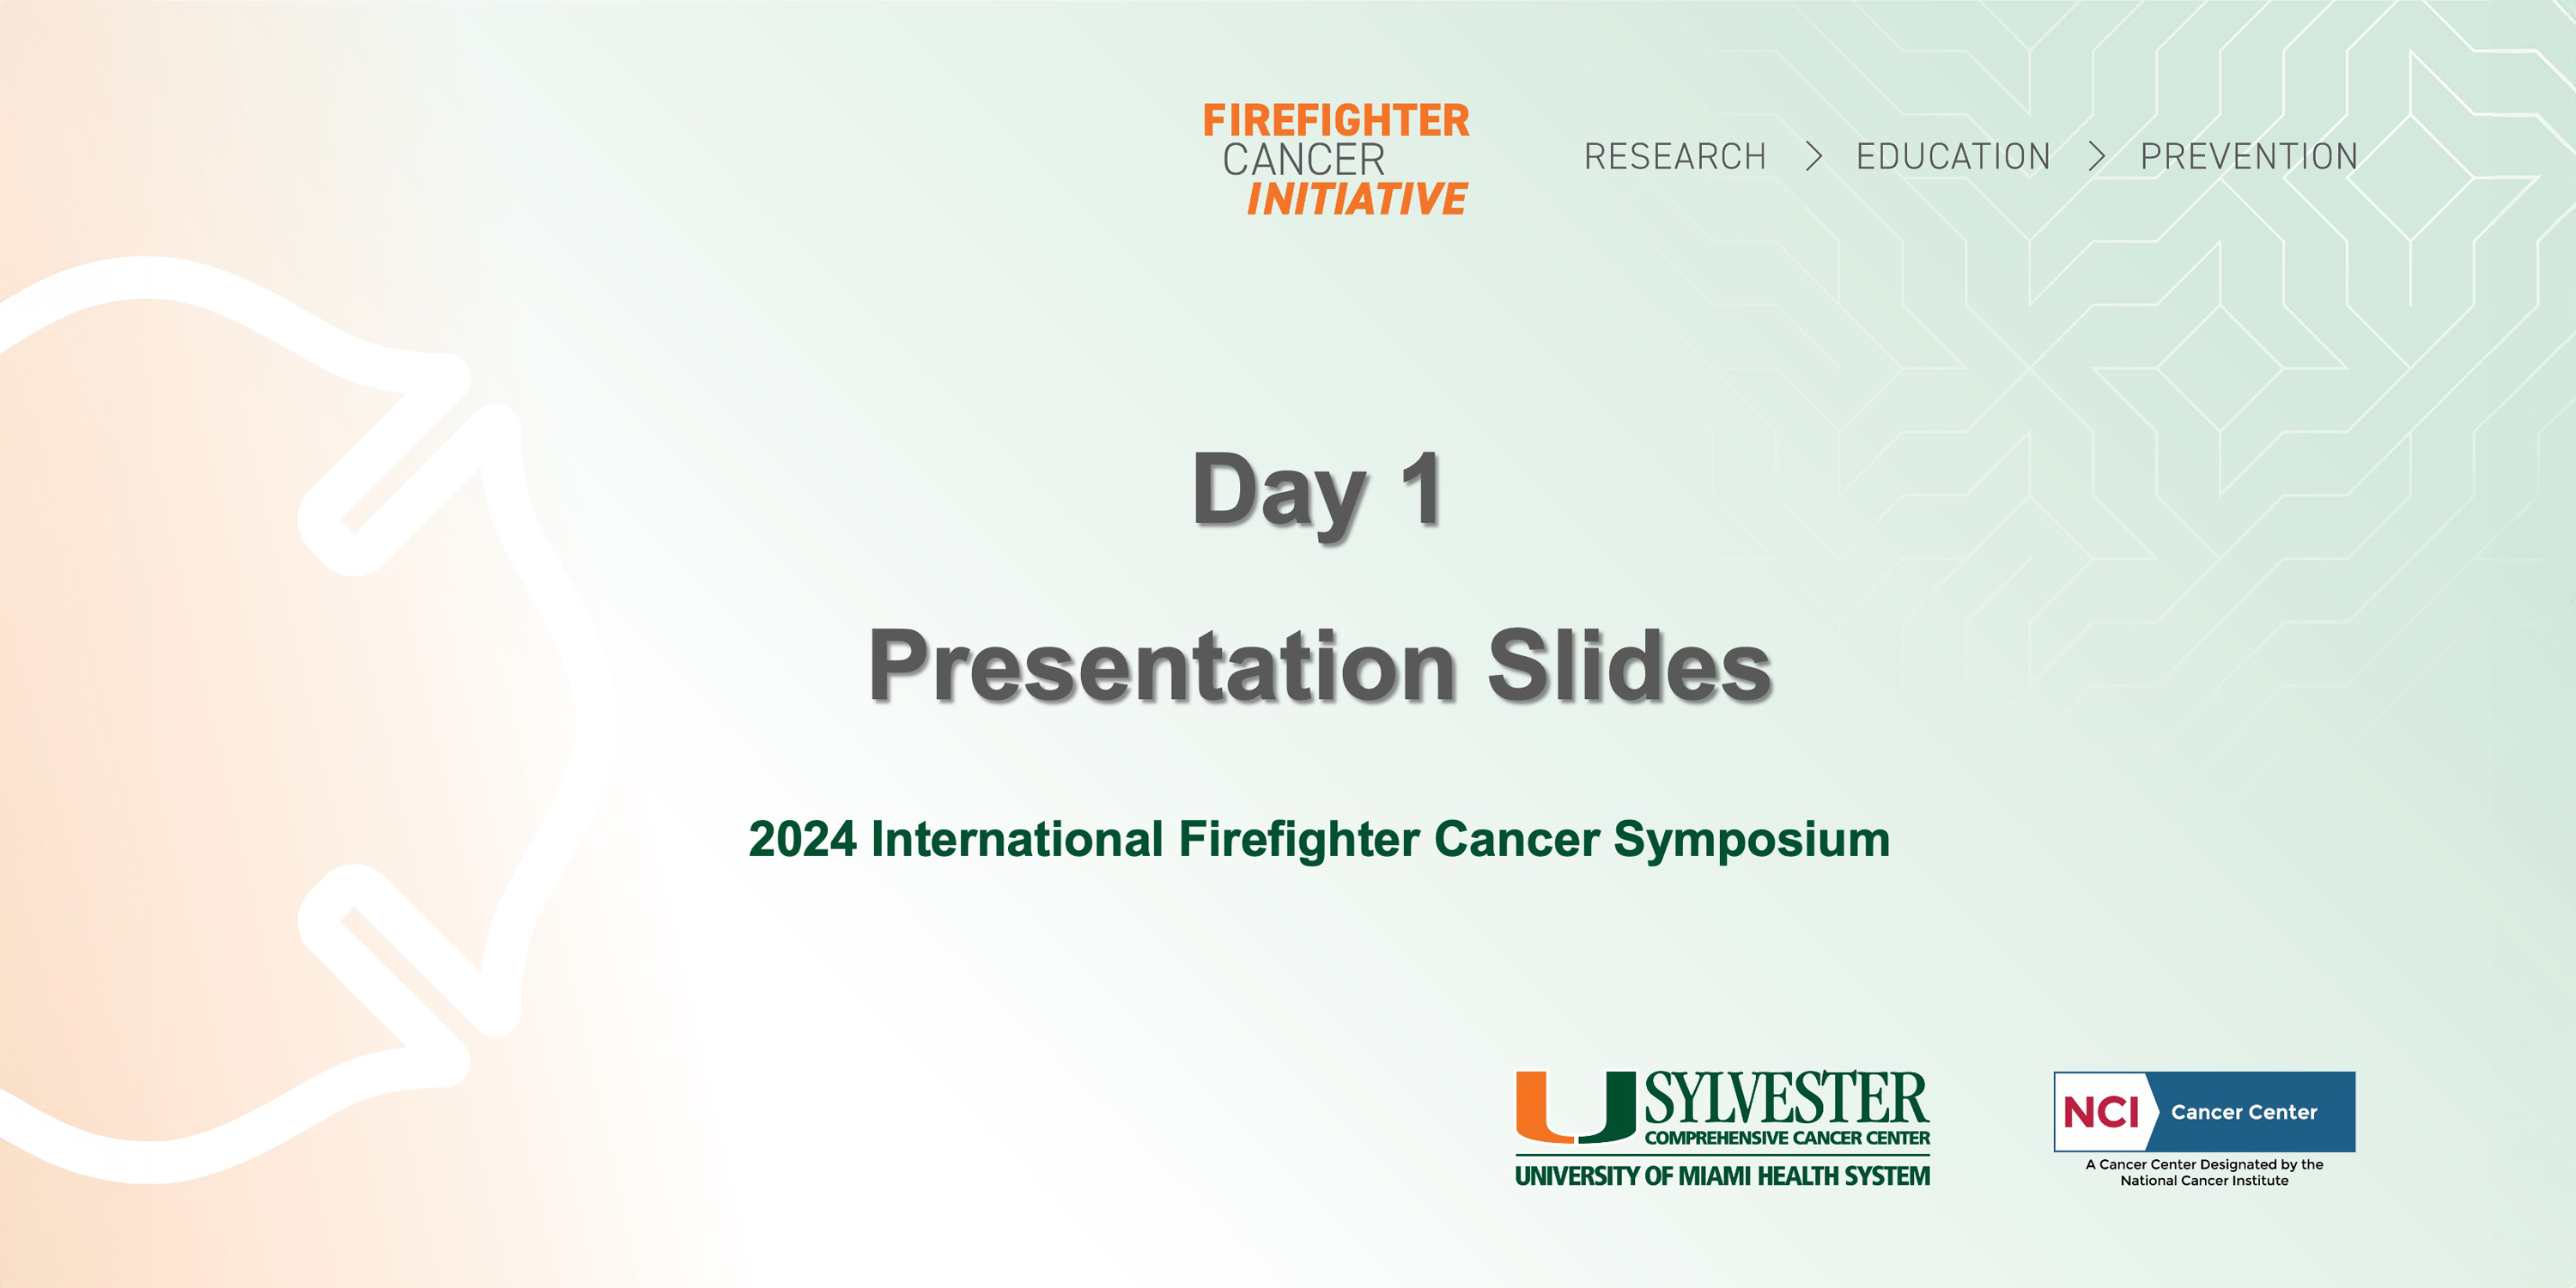 Decorative cover for the 2024 Firefighter Cancer Initiative Symposium, Day 1 Presentation Slides